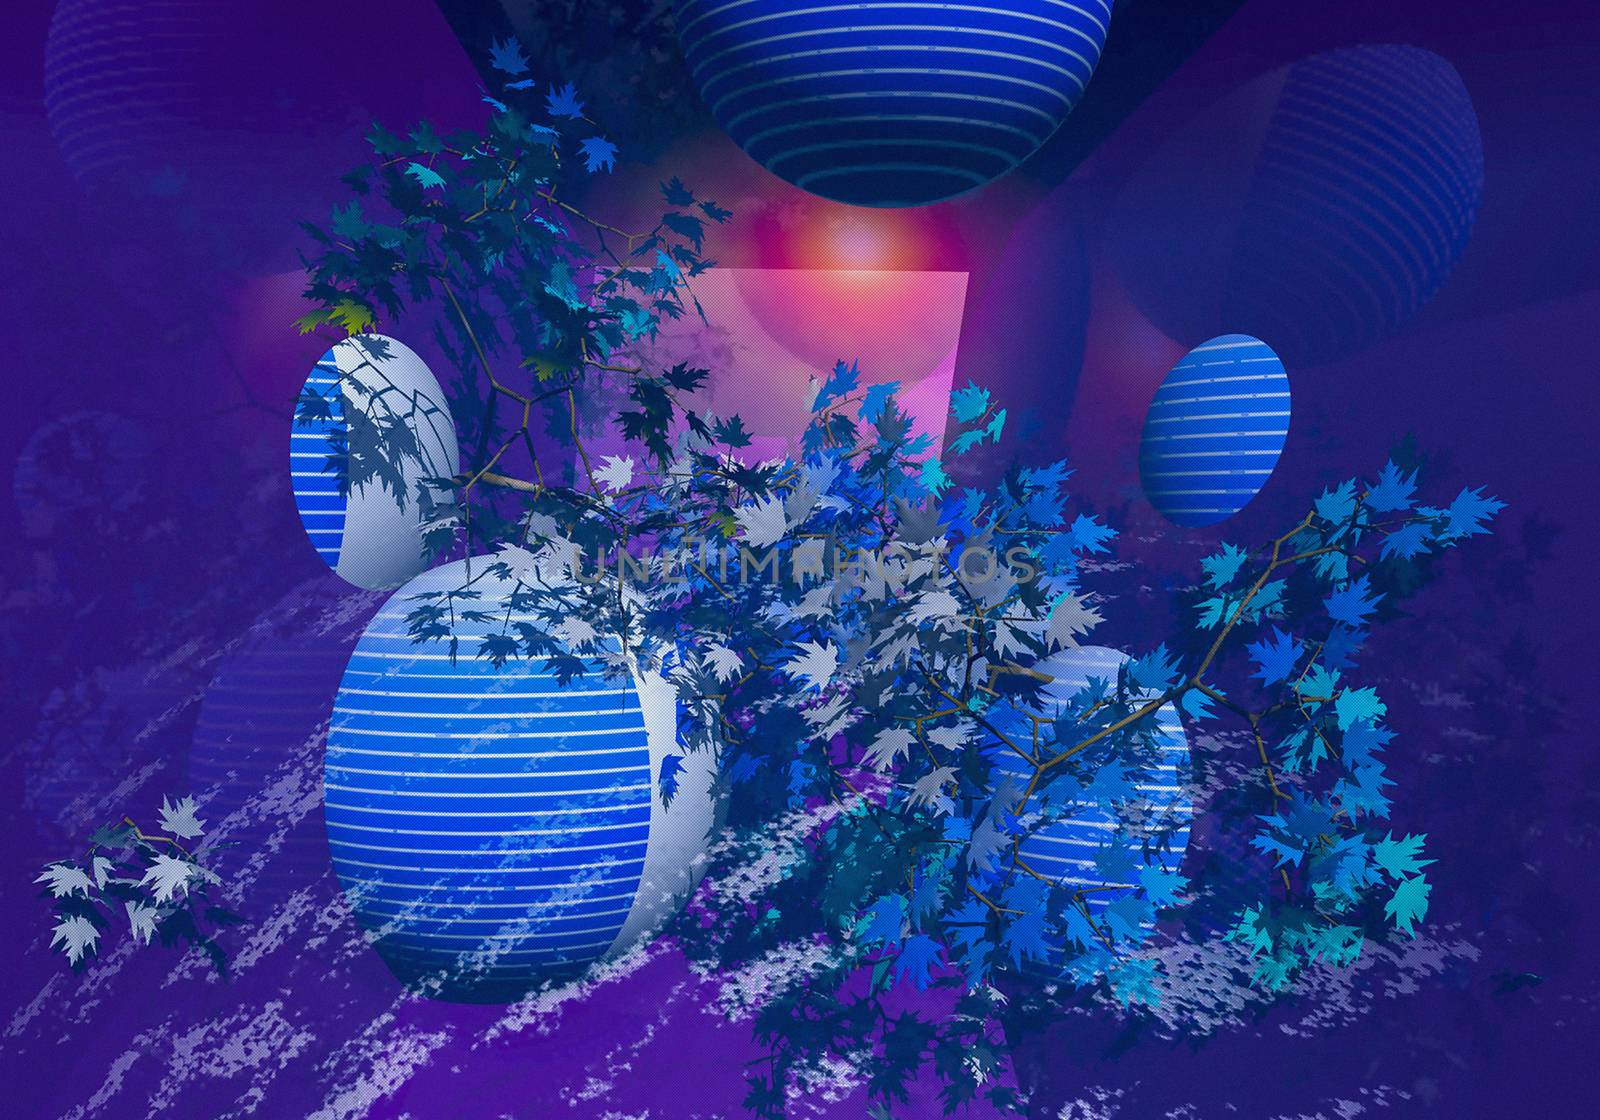 3d image of abstract textured scene, using decorative branches and objects